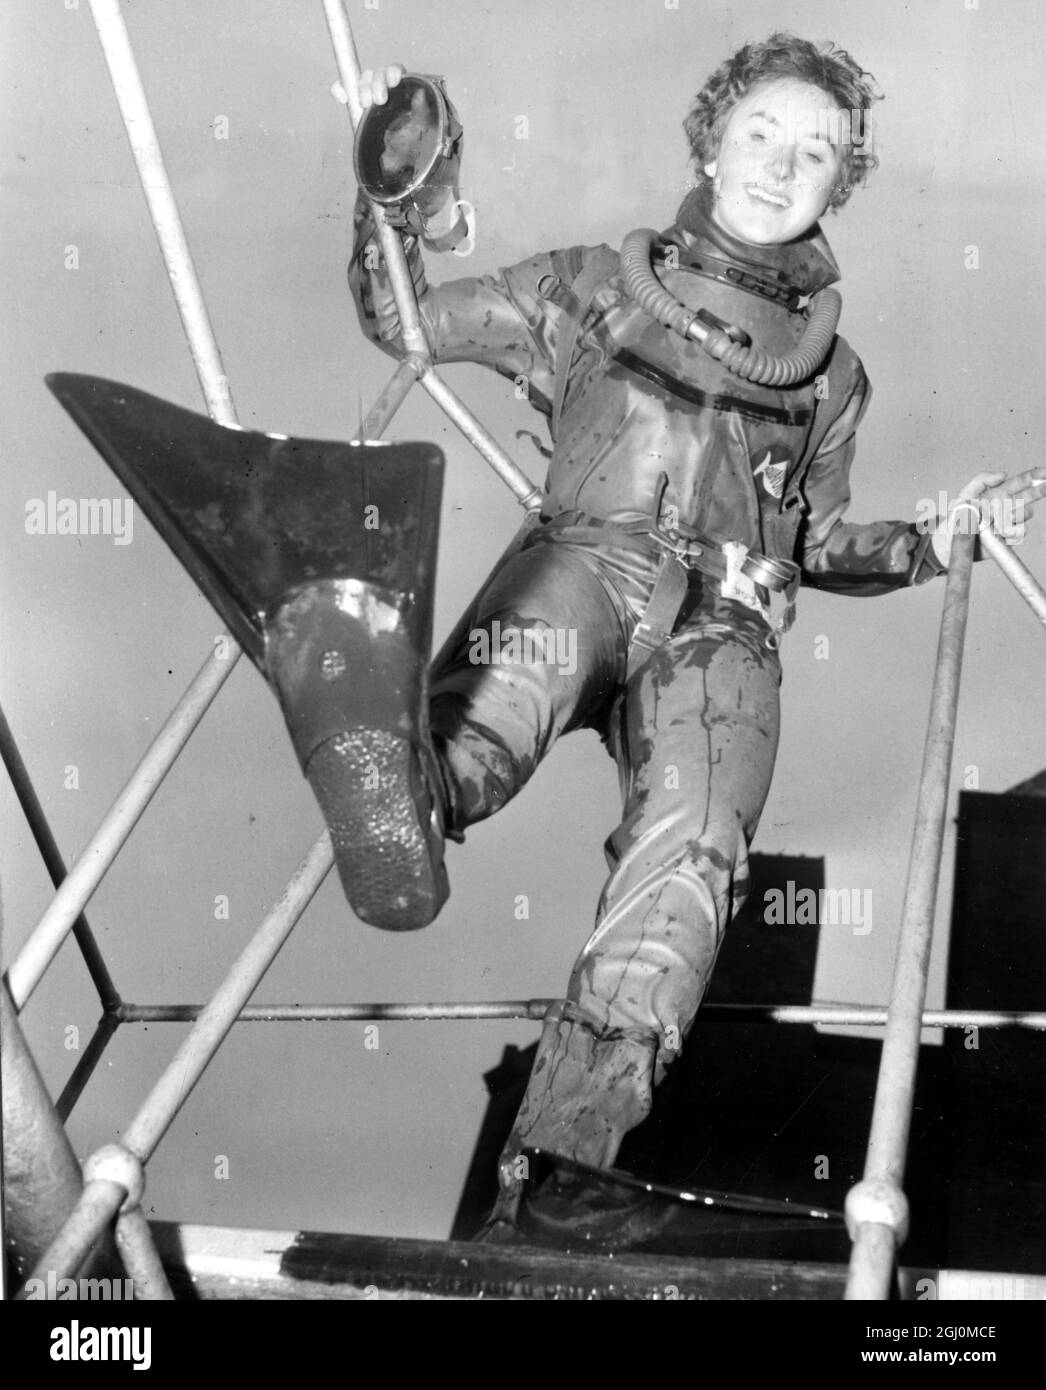 London England Exhibition Underwater Equipment 25 year old Rowena Ker of Stourbridge Worcestershire in frogman outfit . 25 March 1958 Stock Photo